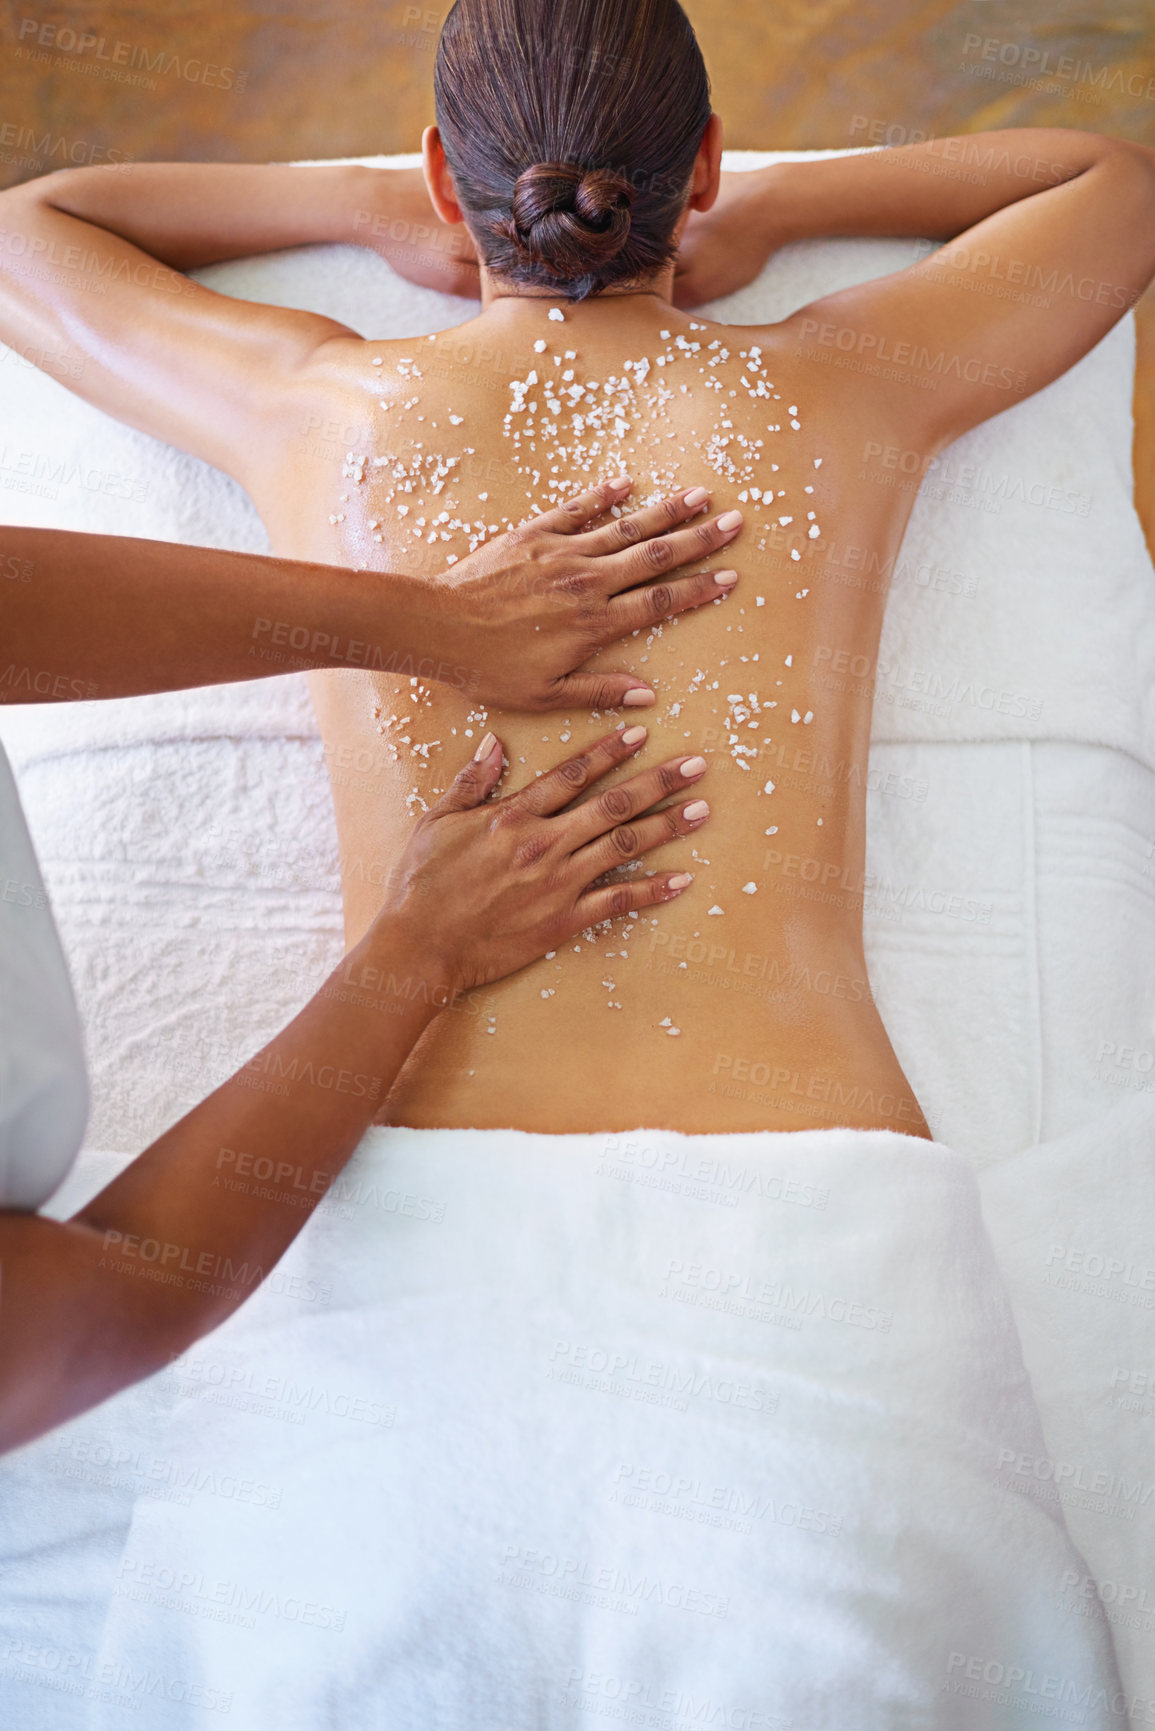 Buy stock photo Rearview shot of a woman getting an exfoliation treatment